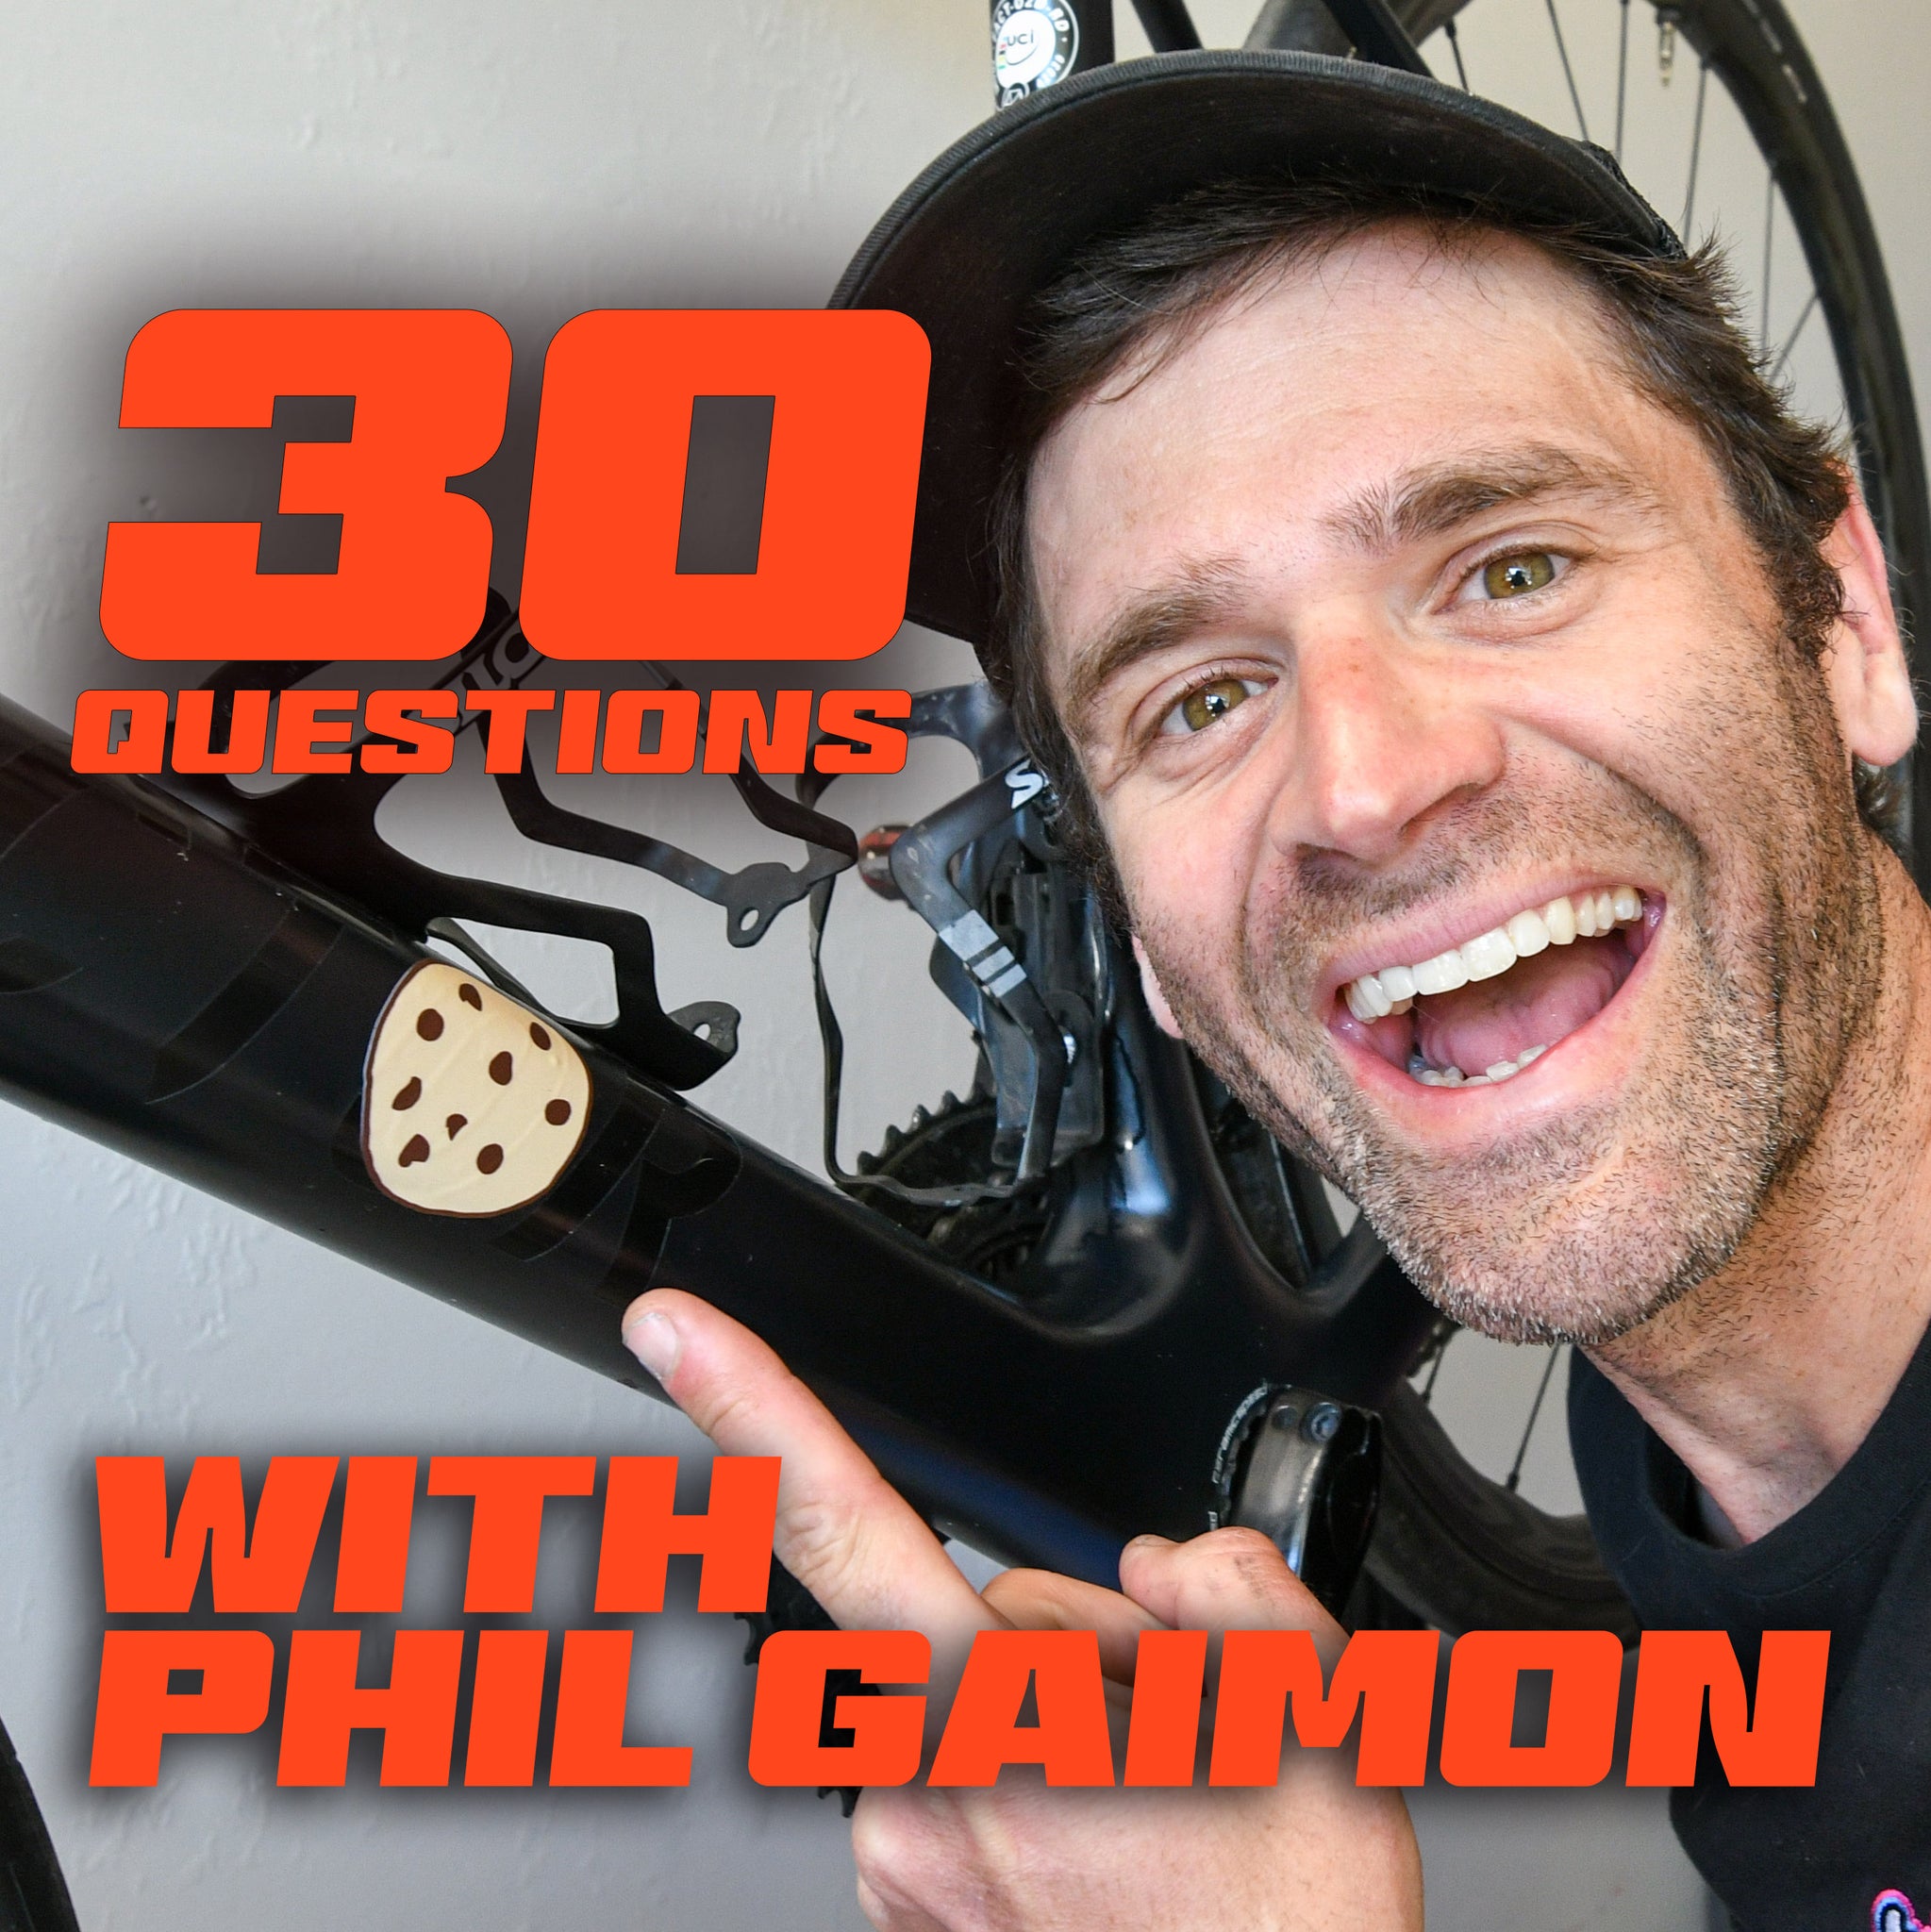 Favorite races, worst ride ever, and training tips: 30 Questions with FasCat athlete Phil Gaimon